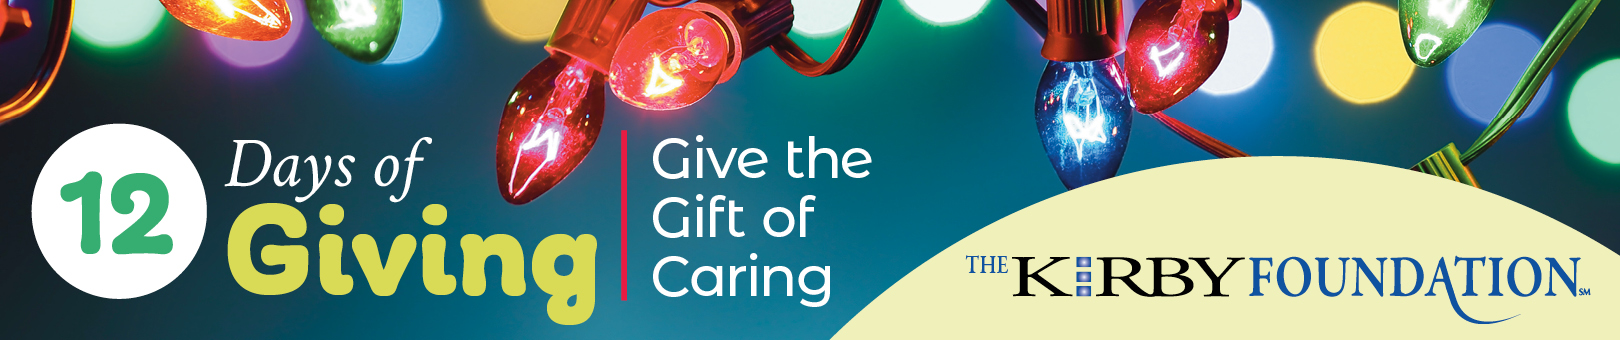 12 days of giving give the gift of caring